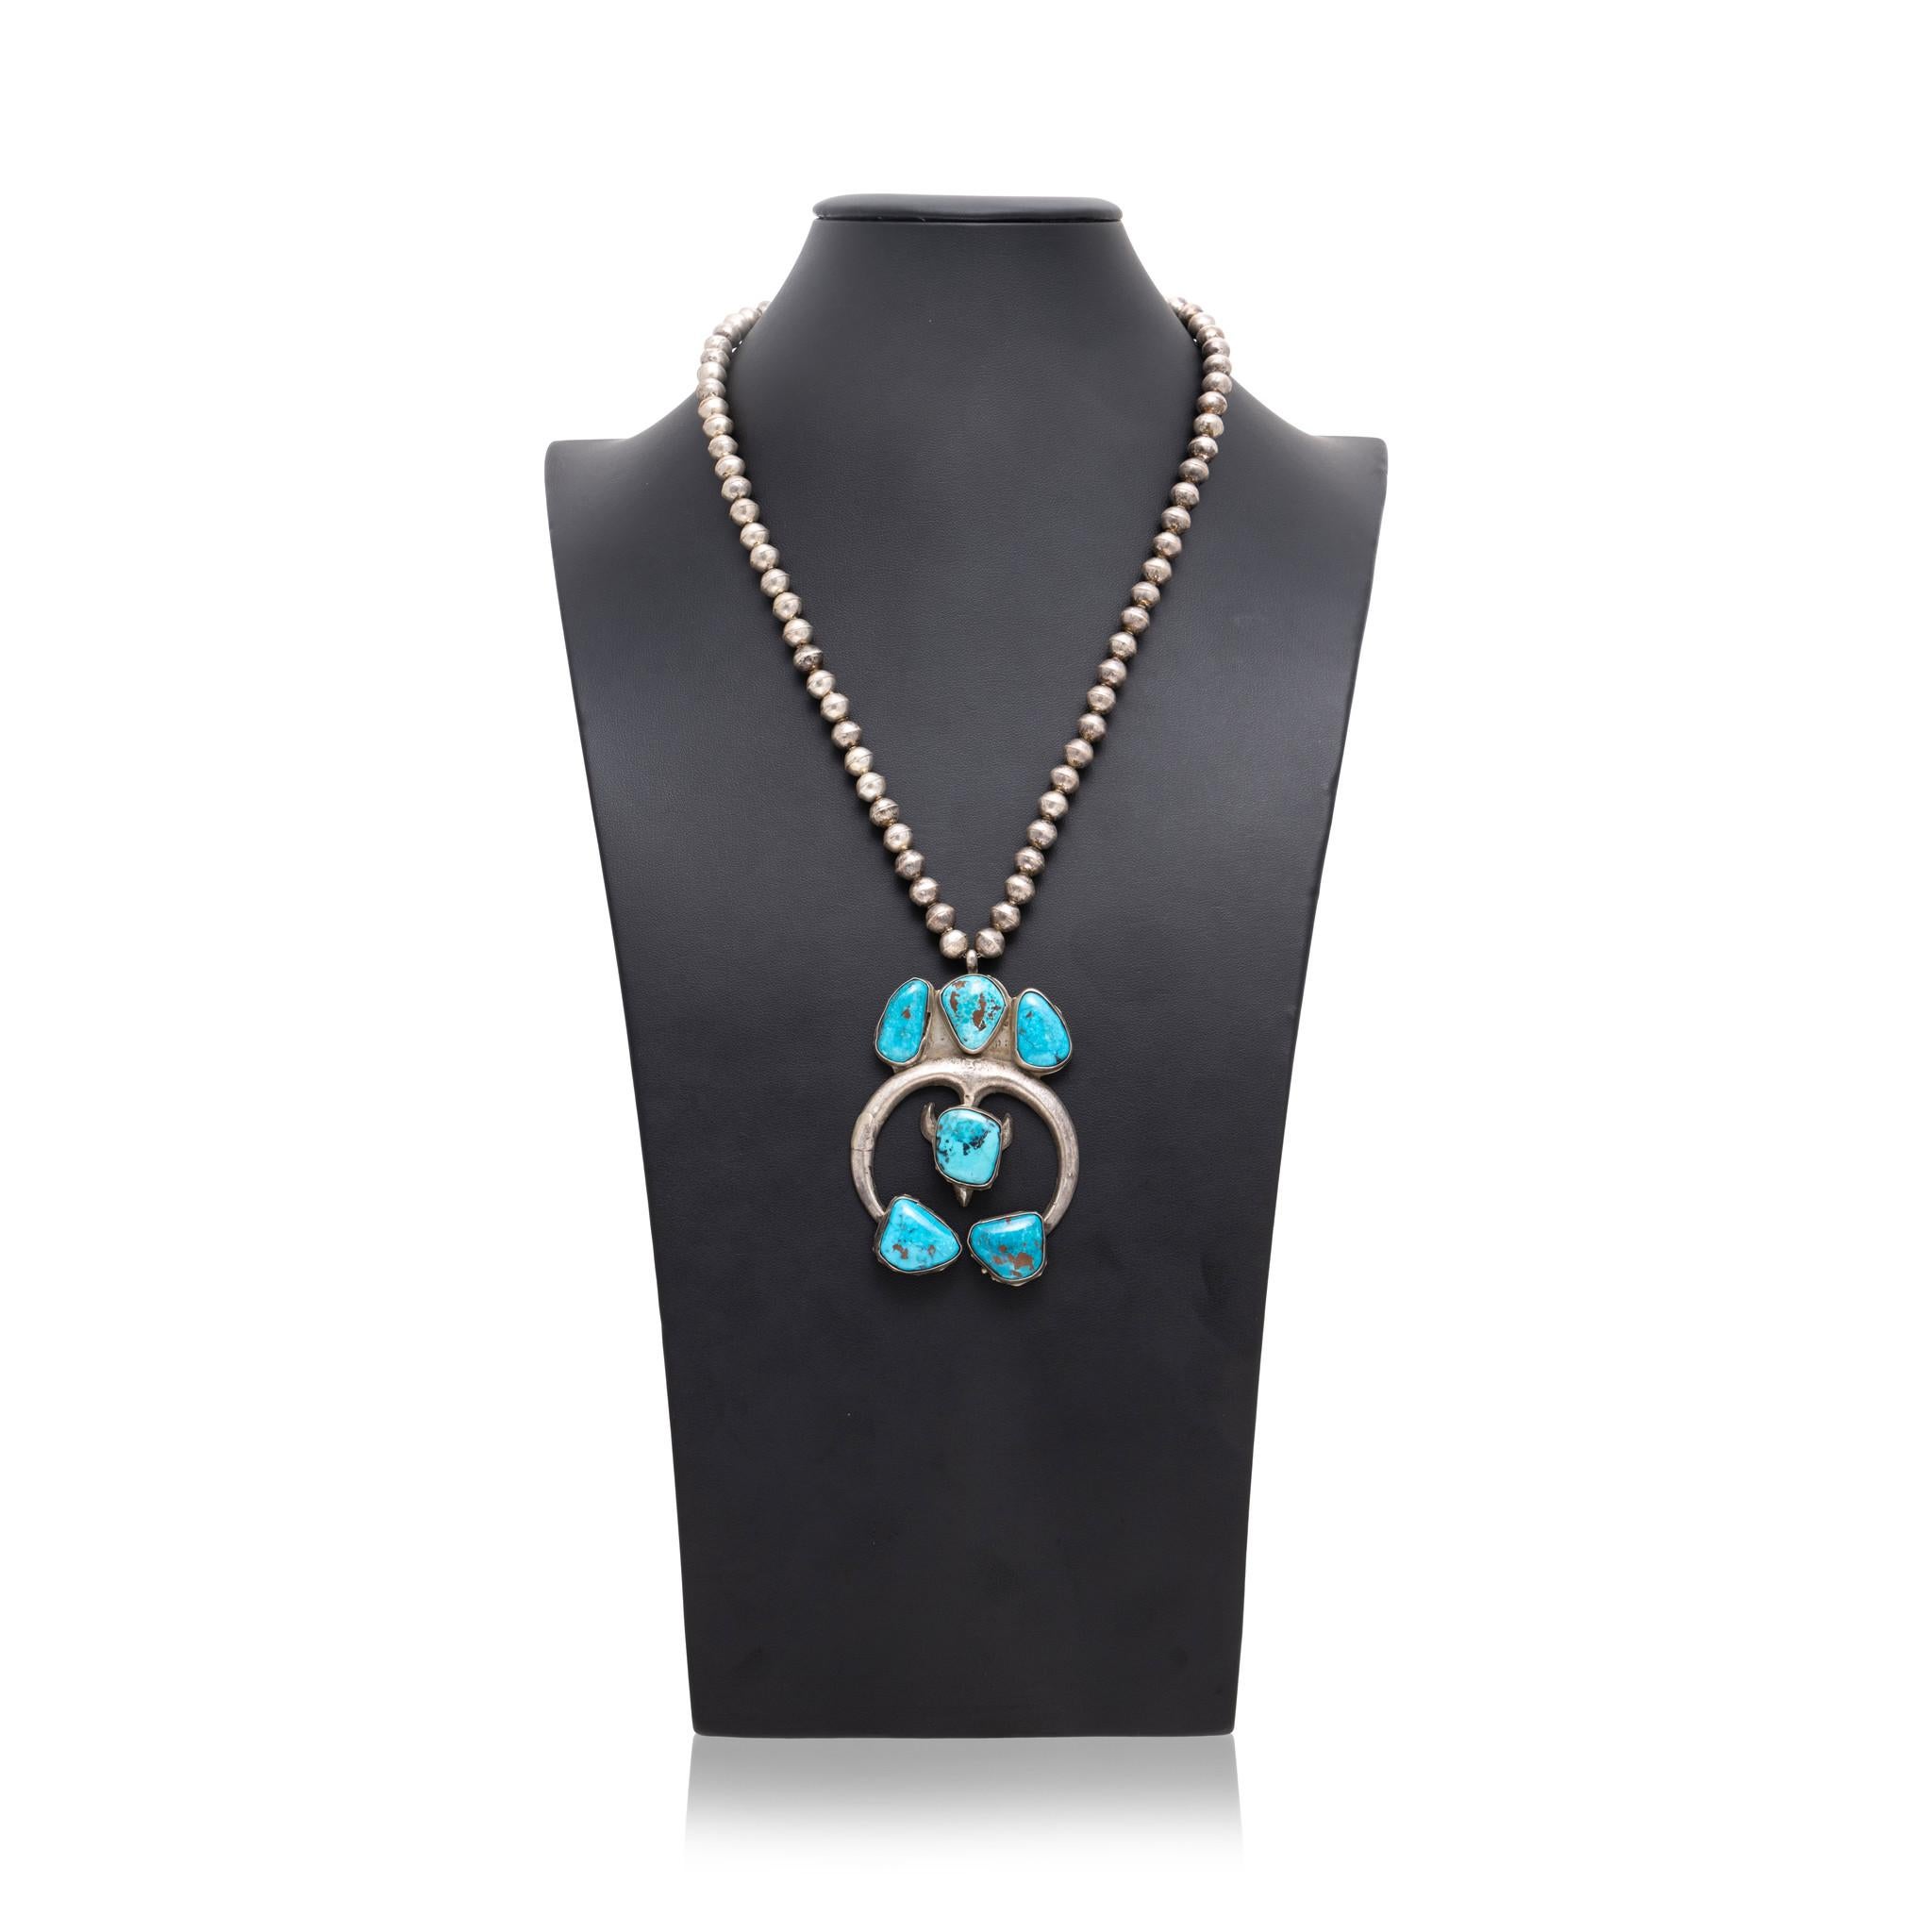 Native American Navajo Indian turquoise and sterling silver sand cast necklace. Six Morenci turquoise stones attached to a sand casted naja style pendant on Navajo pearl chain. No maker's mark. Stones are a vibrant and bright blue color with minimal